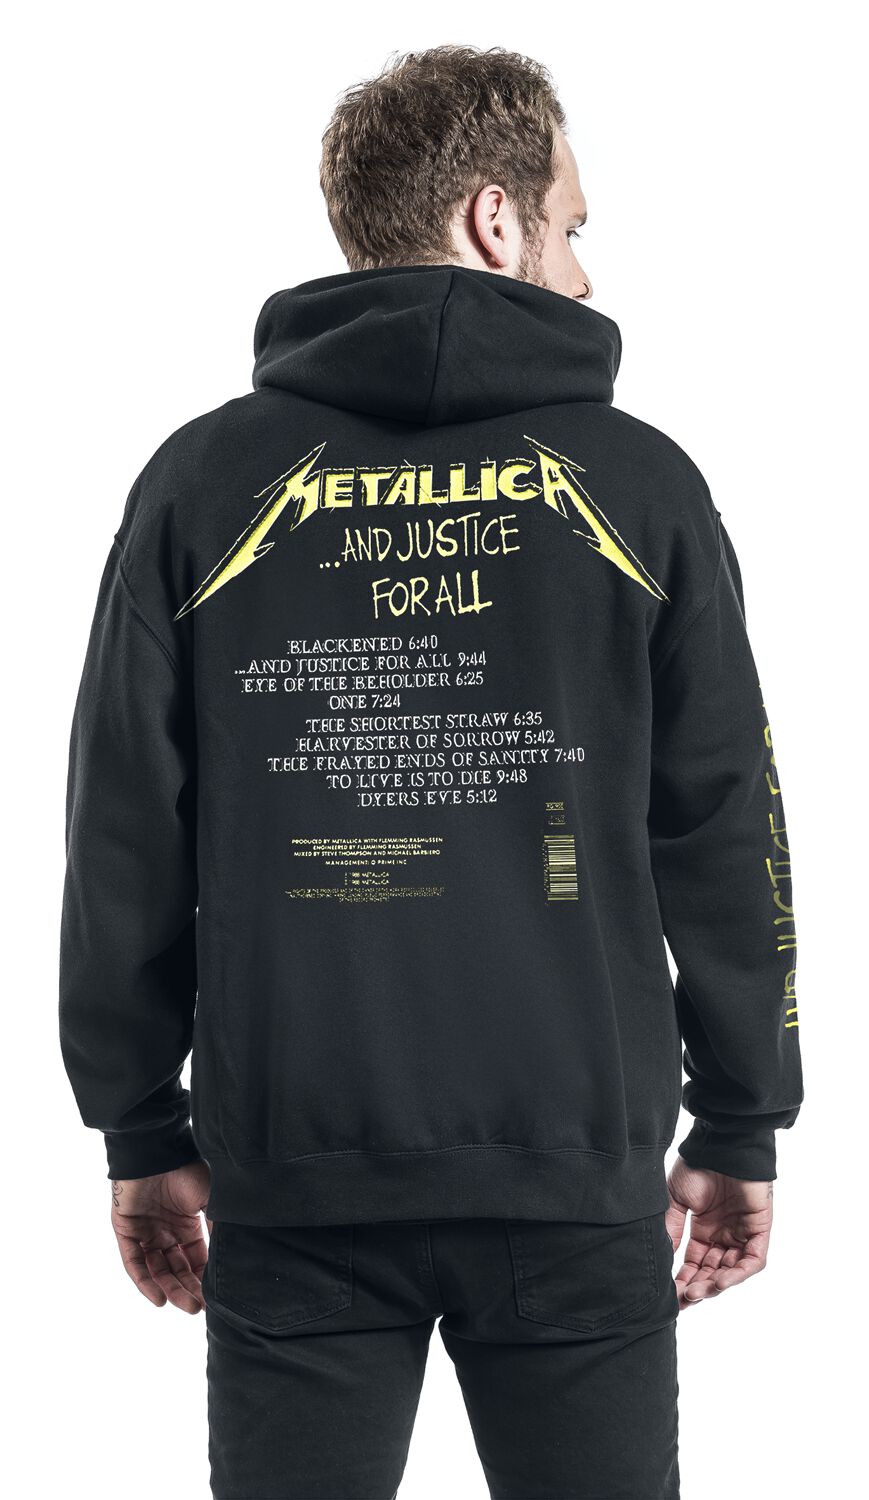 And Justice For All | Metallica Sudadera capucha | EMP